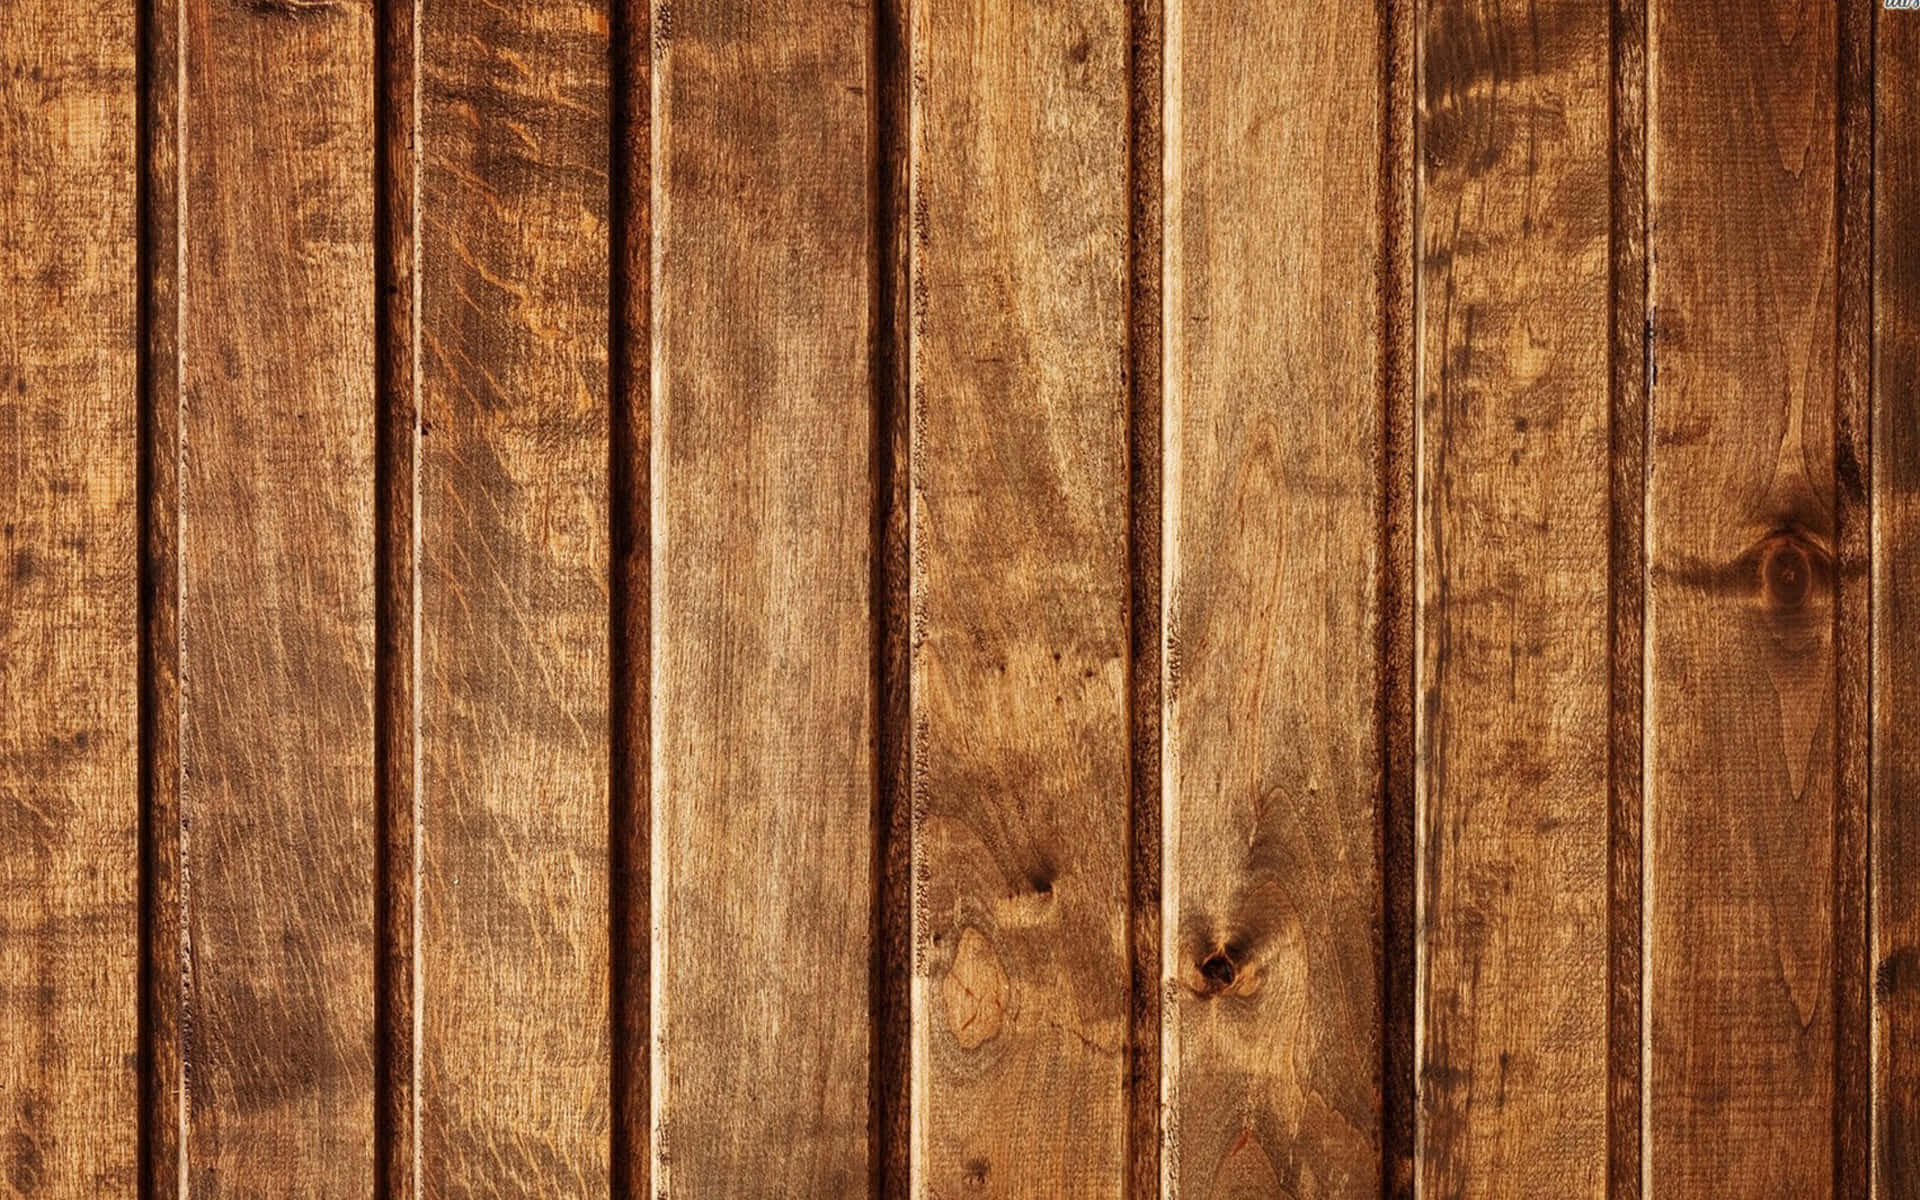 A wooden texture wall with a warm, rustic feel